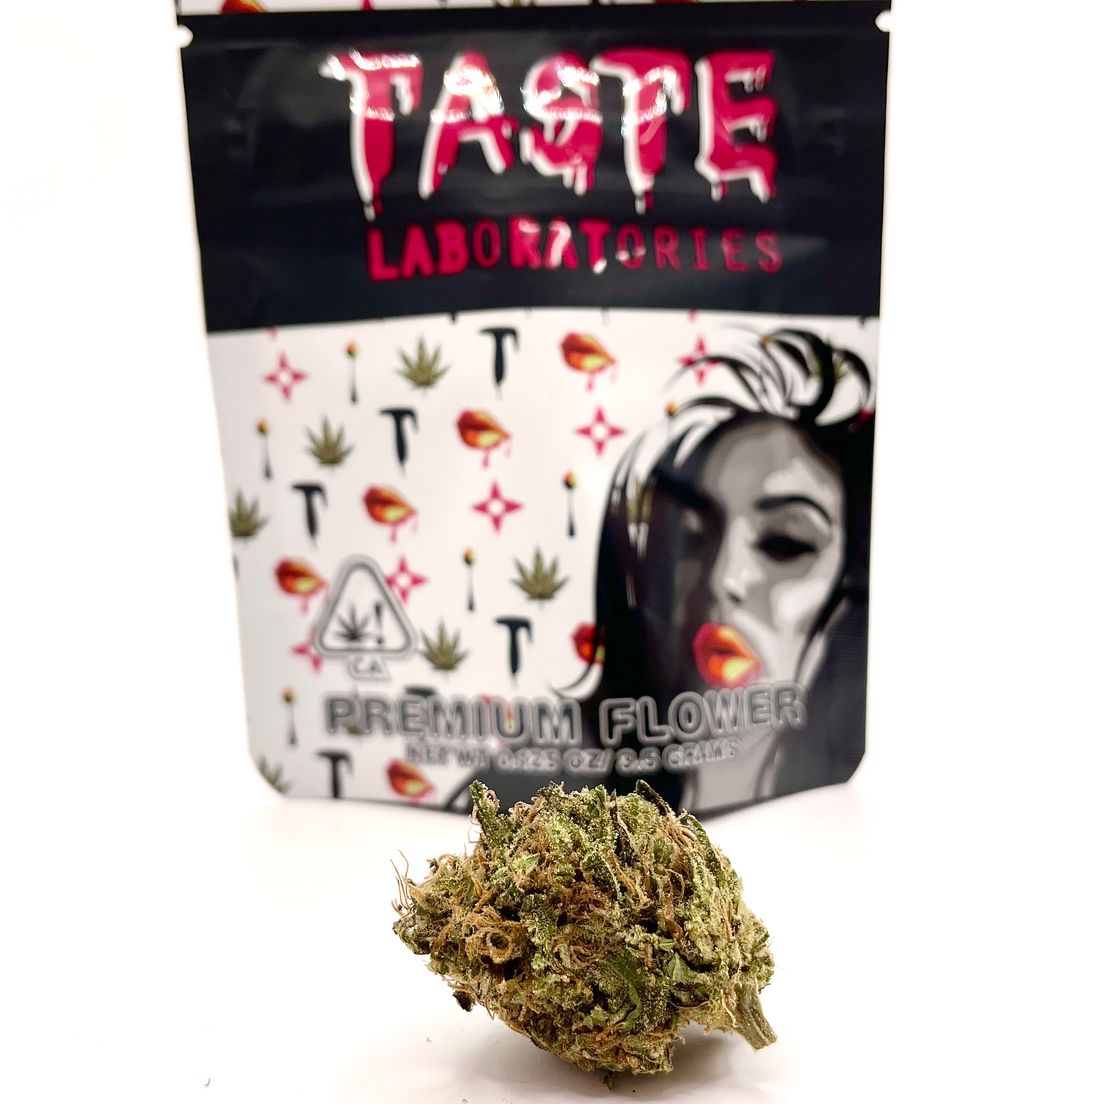 *BLOWOUT DEAL! $25 1/8 Northern Lights (30.5%/Indica) - Taste